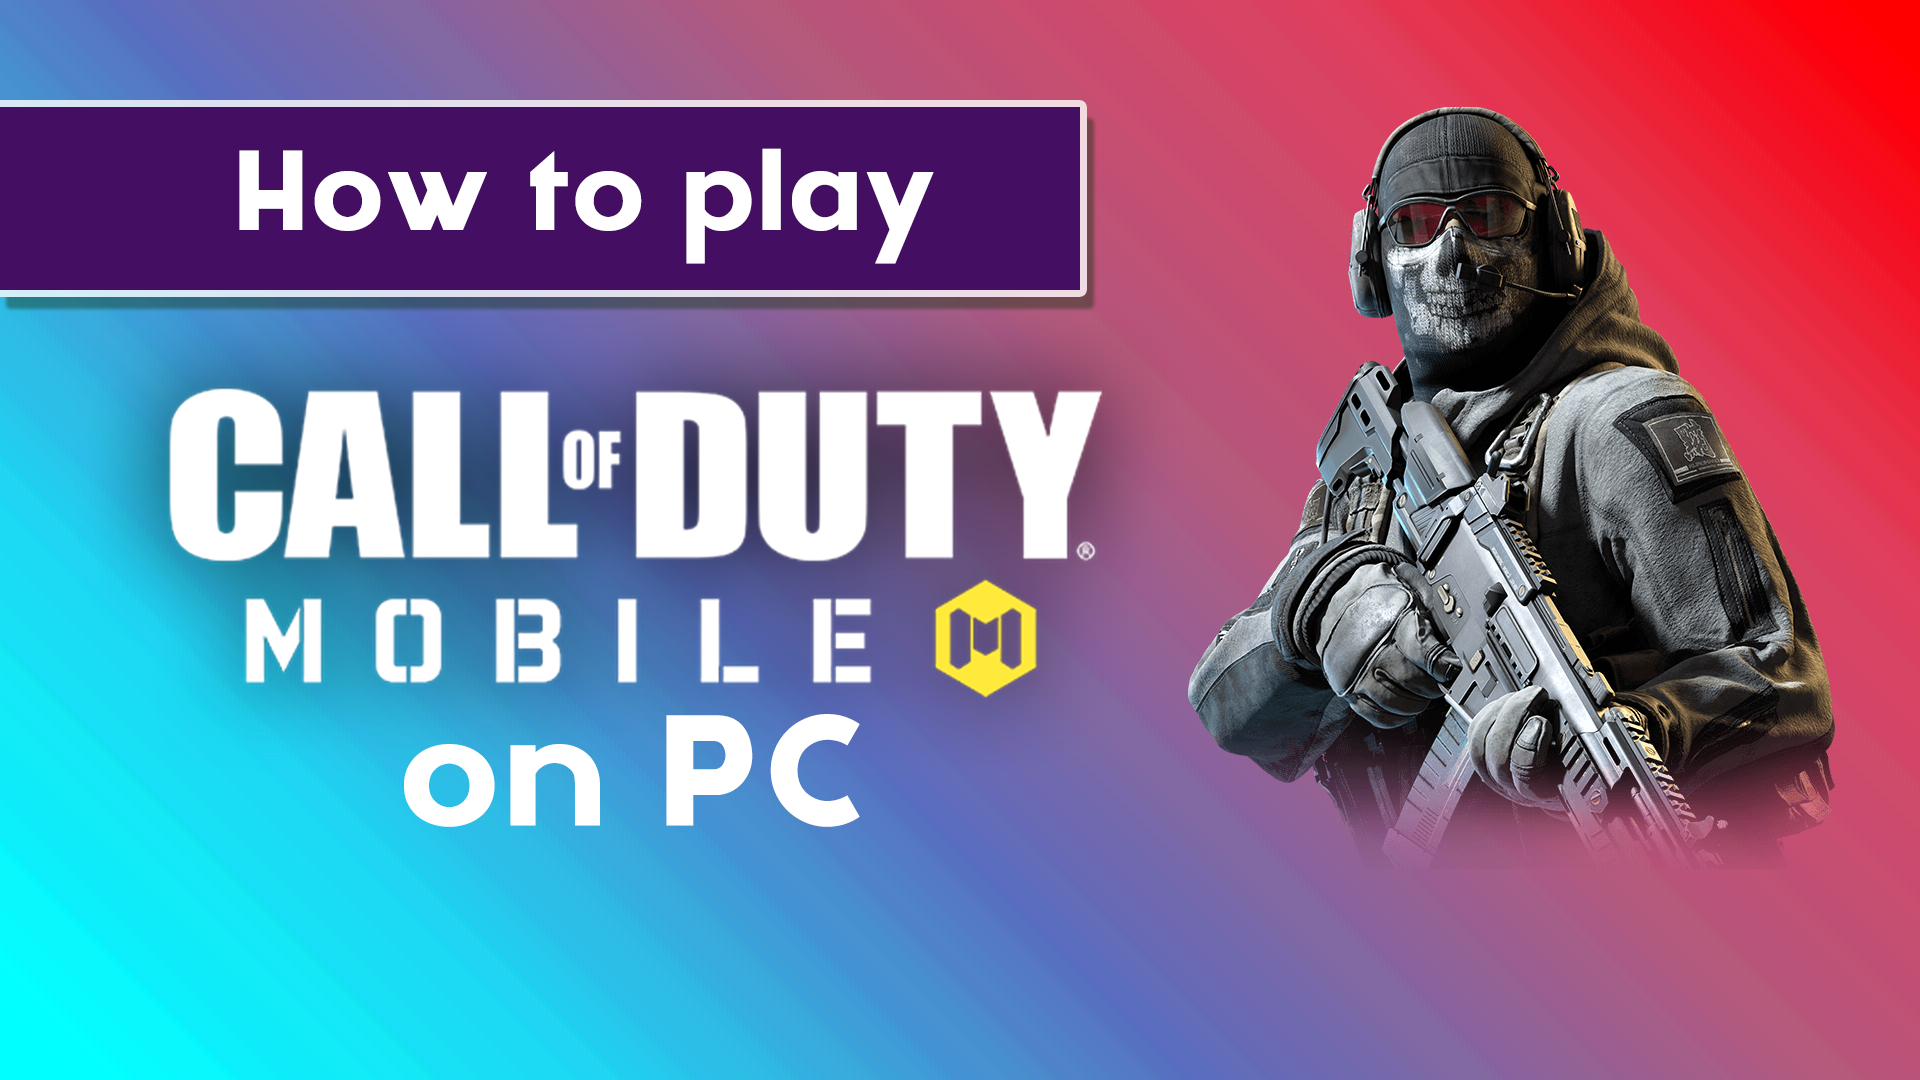 can you download call of duty mobile on pc